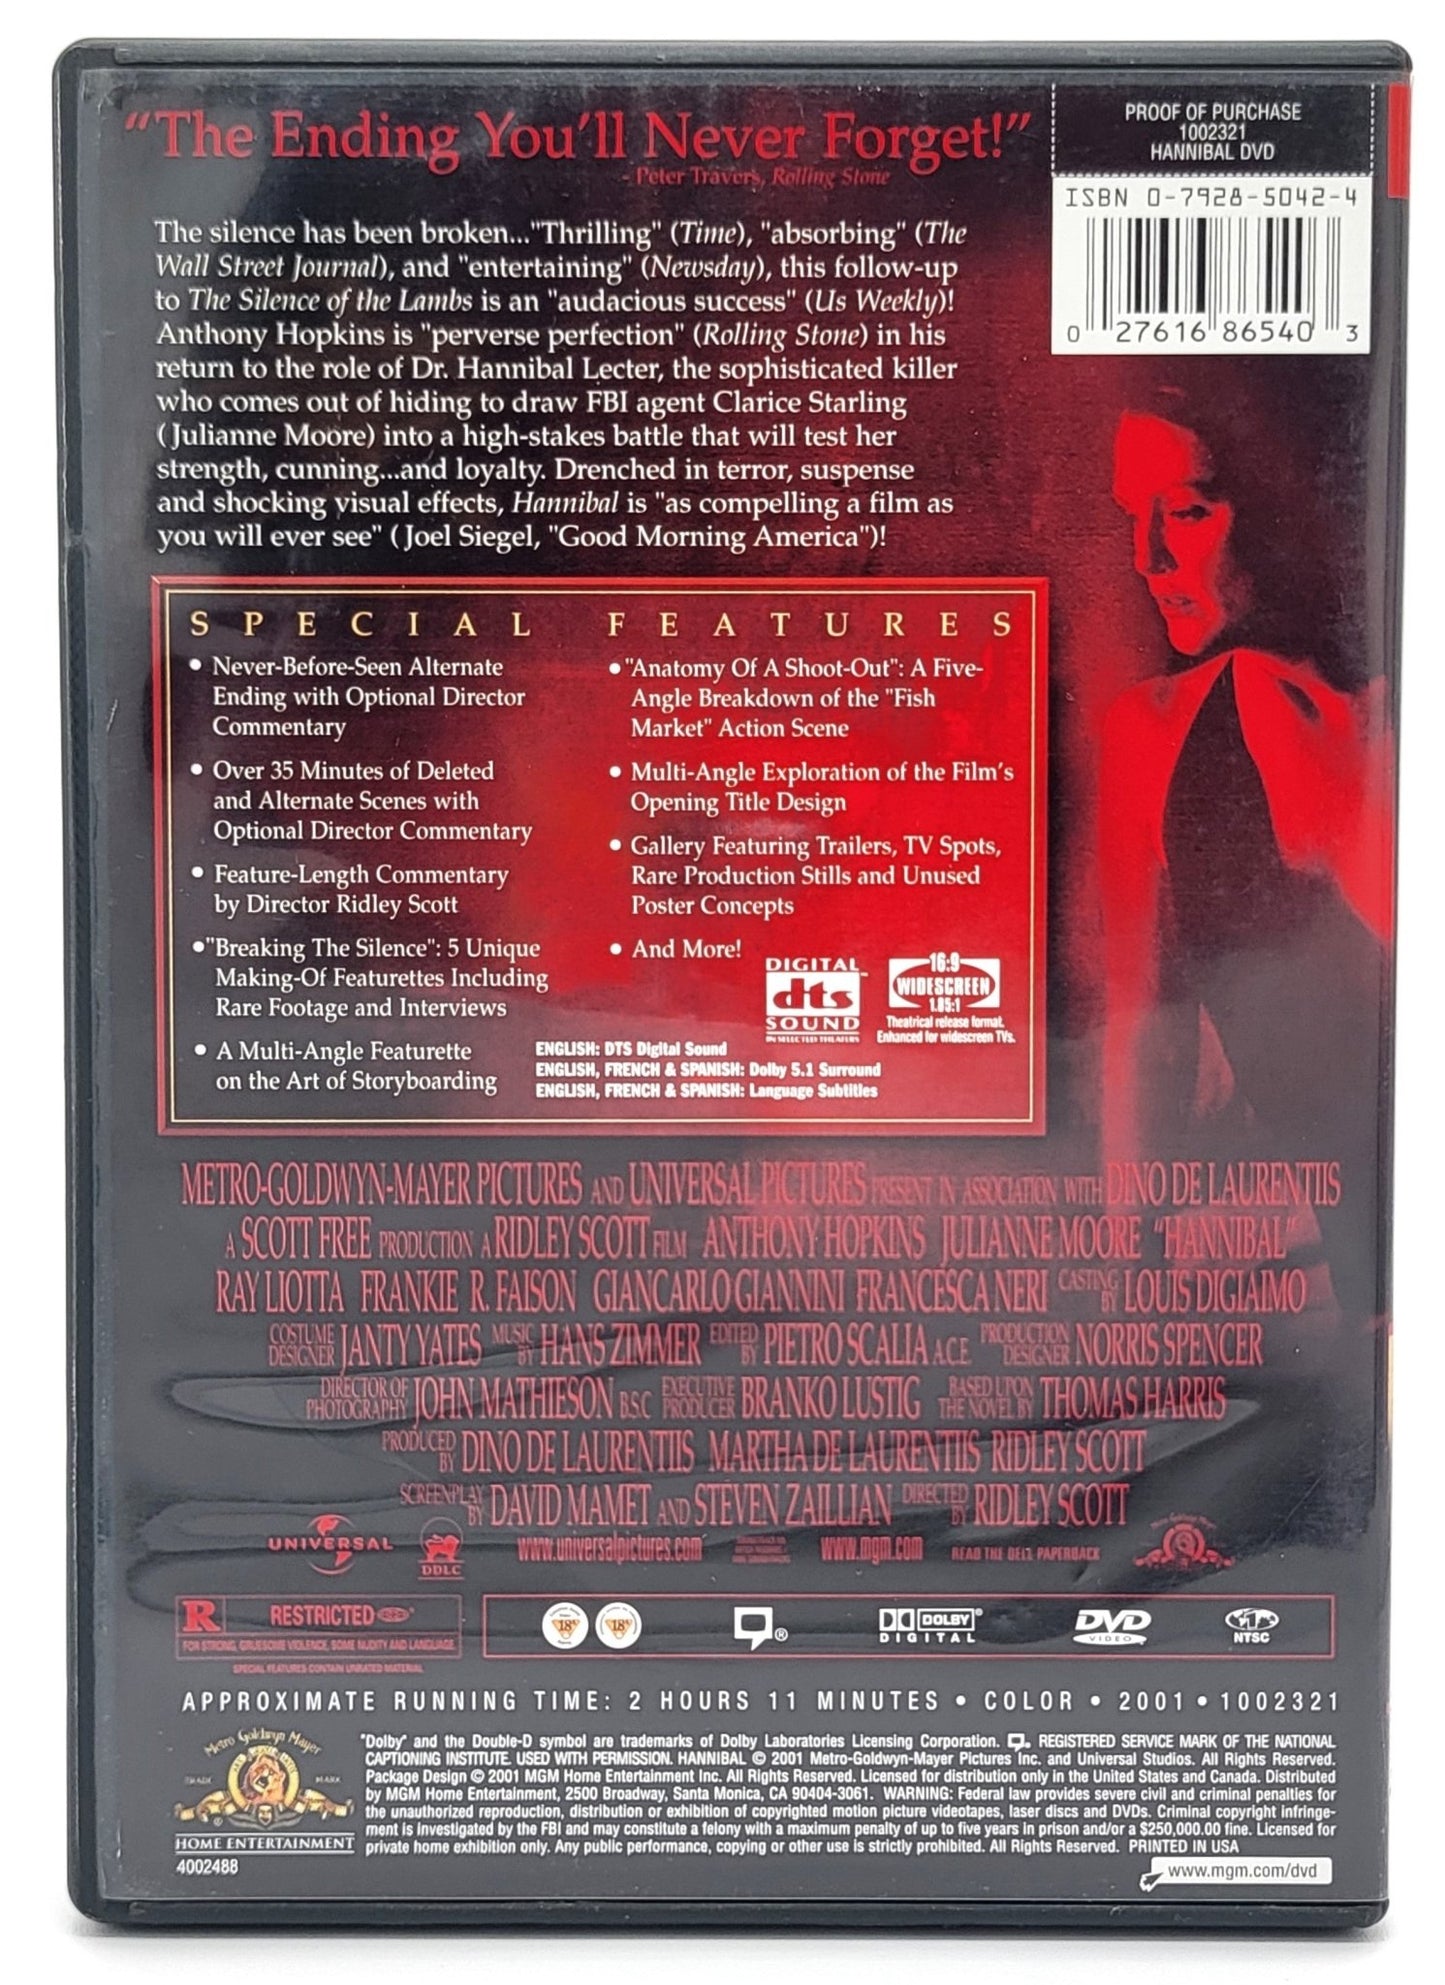 ‎ MGM Home Entertainment - Hannibal | DVD | Special Edition - 2 Disc Set - DVD - Steady Bunny Shop